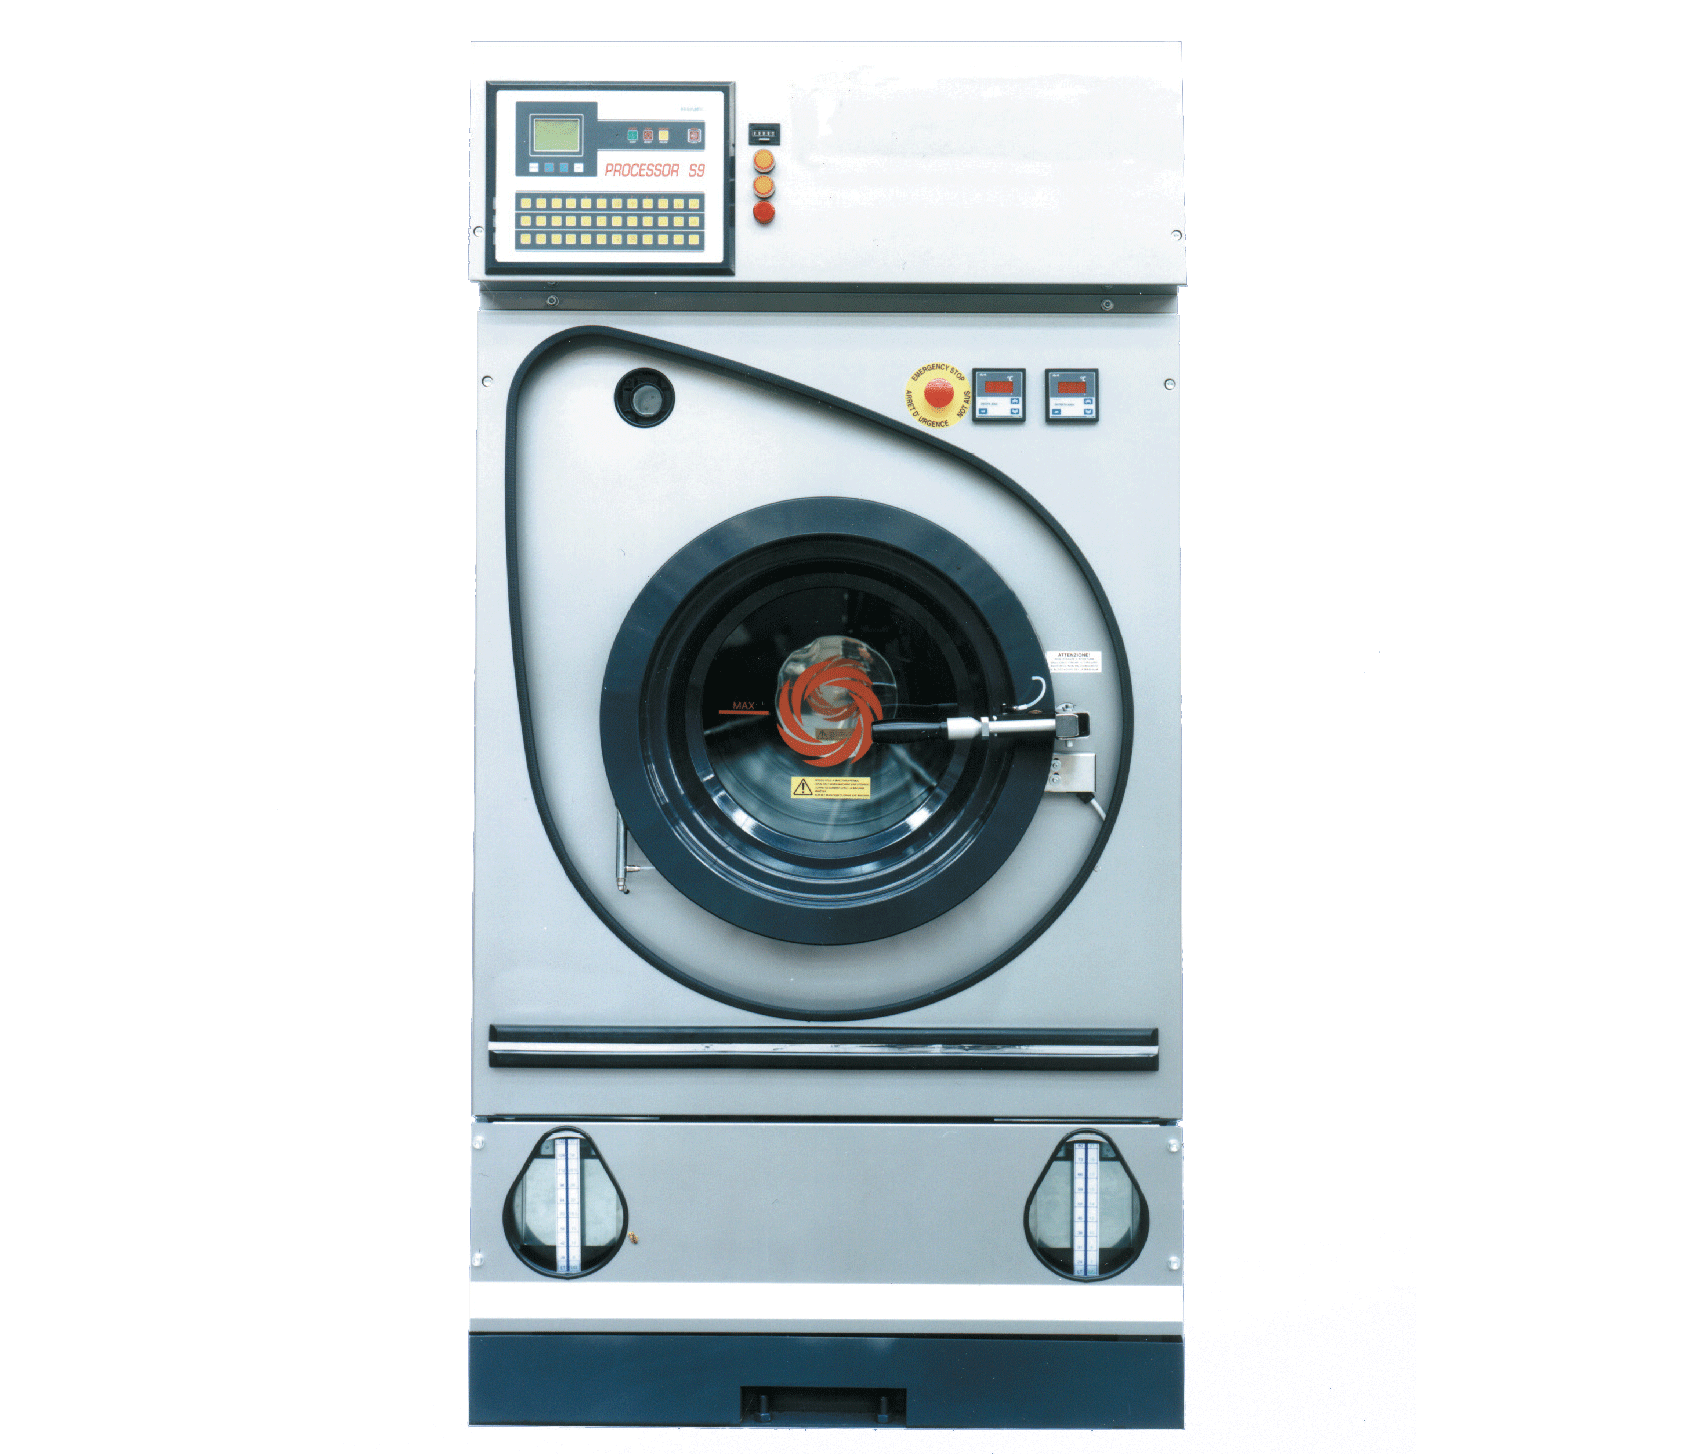 Standardized Dry Cleaning Machine Image